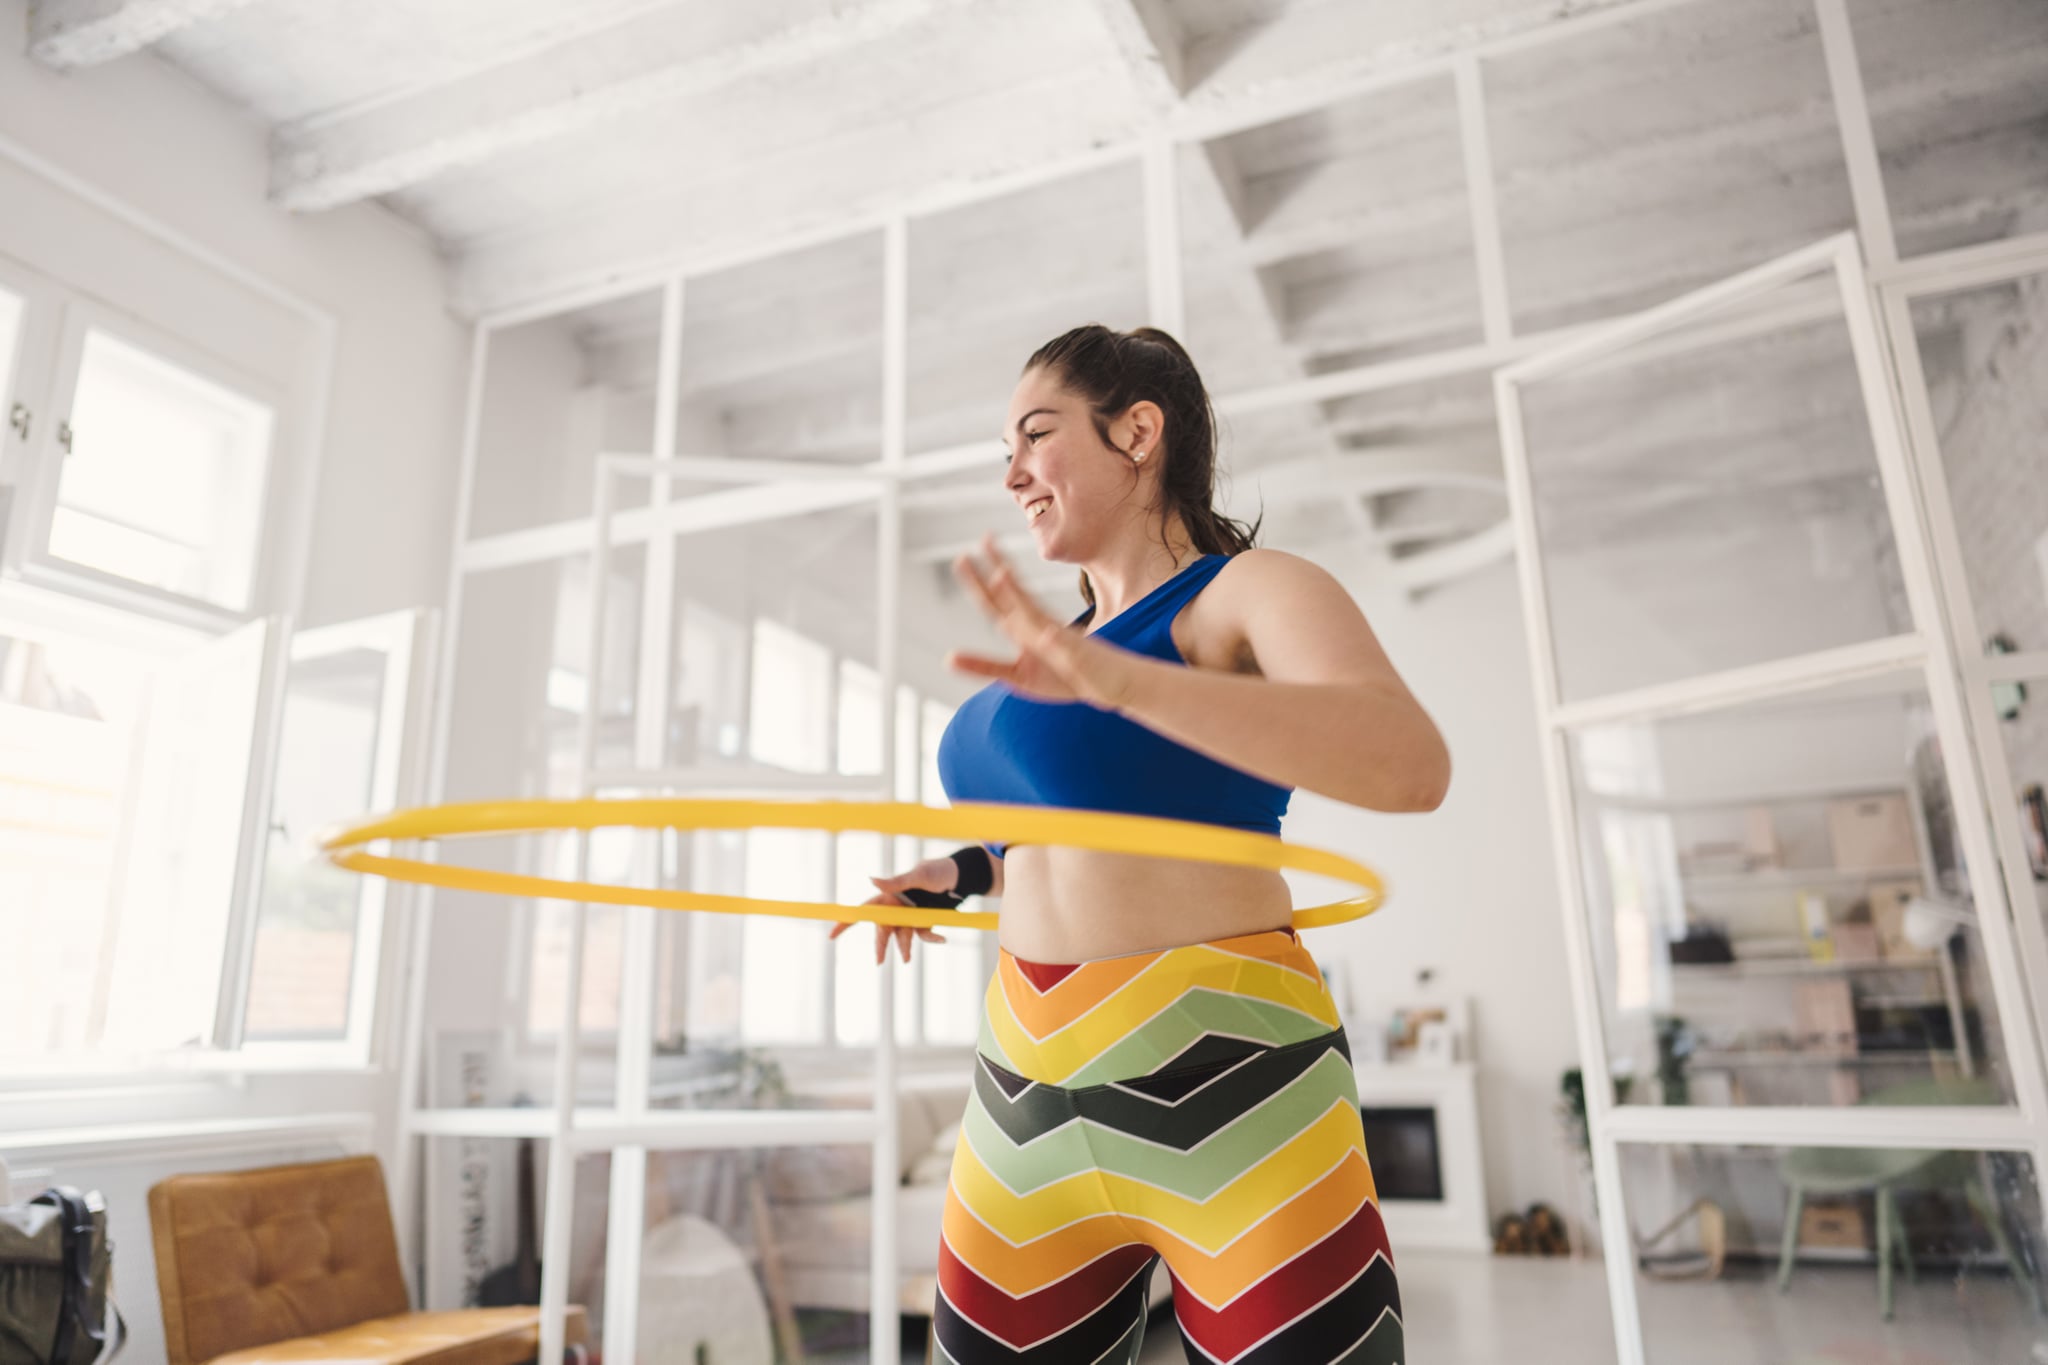 Weighted hula hoop workout